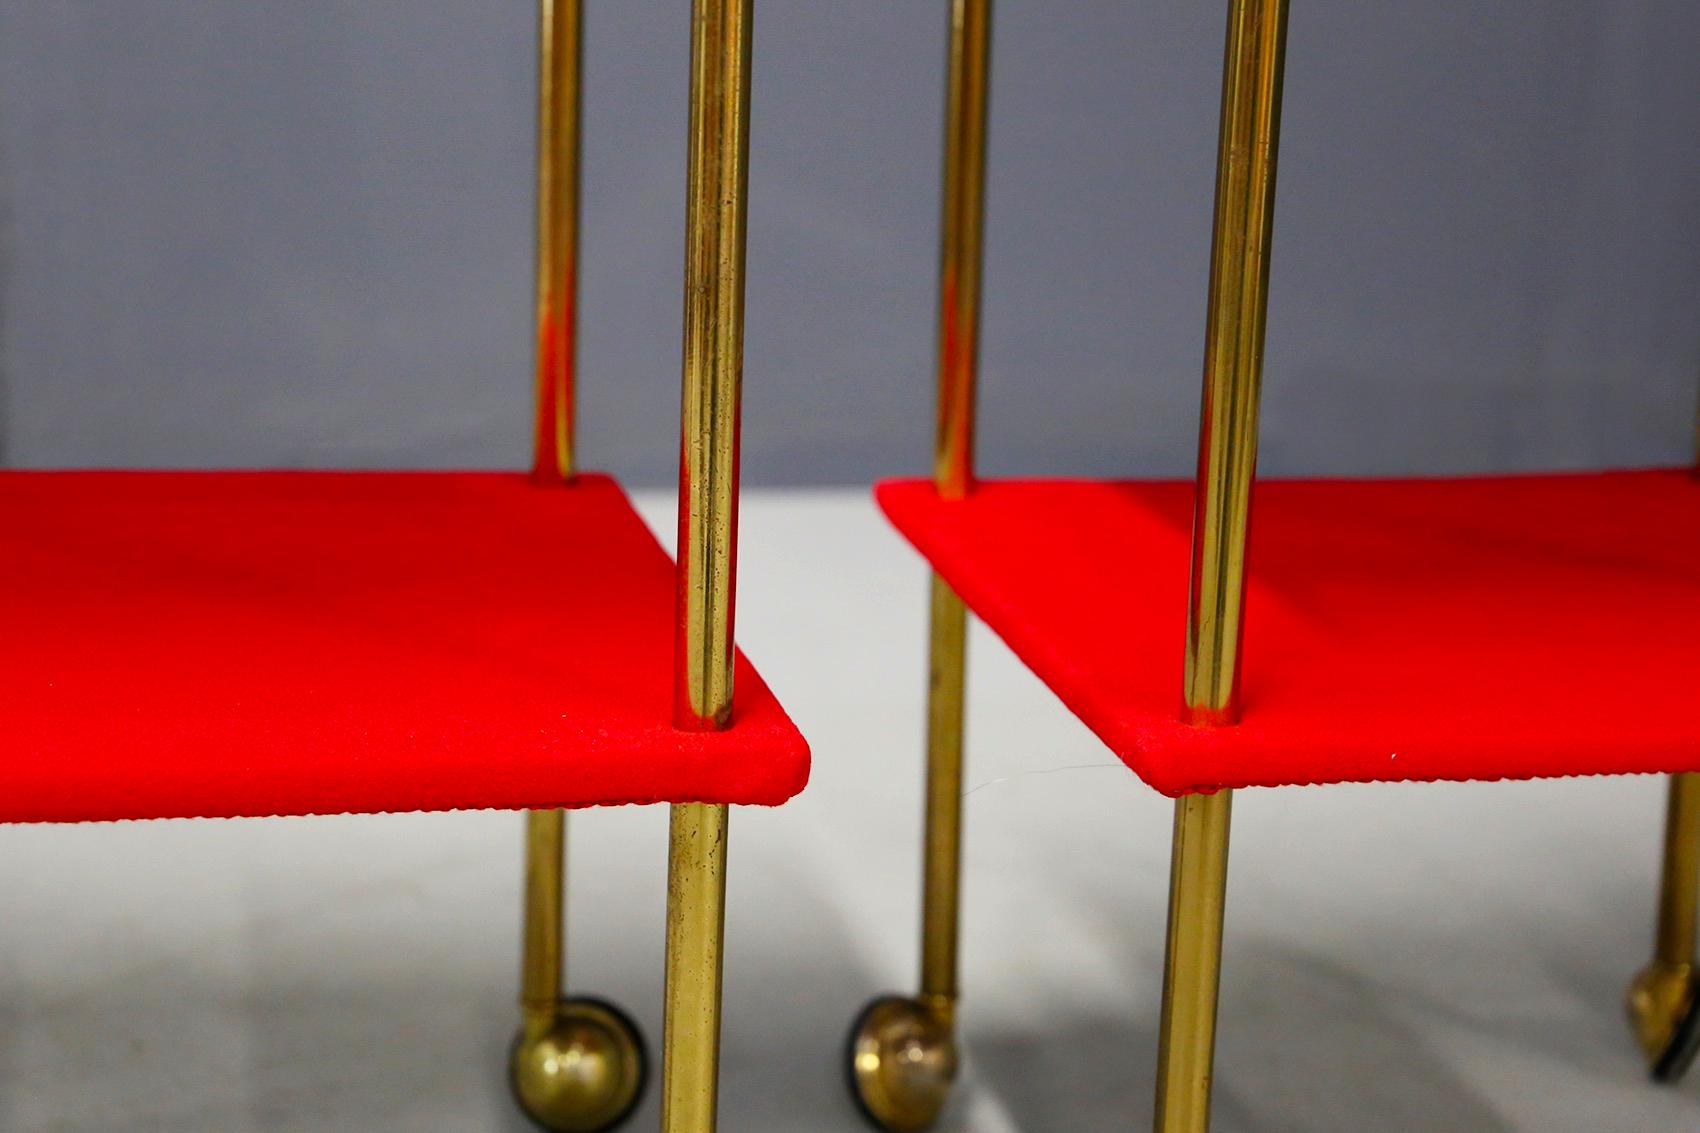 Brass Pair of Side Tables Model T9 by Luigi Caccia Dominioni for Azucena, 1950s